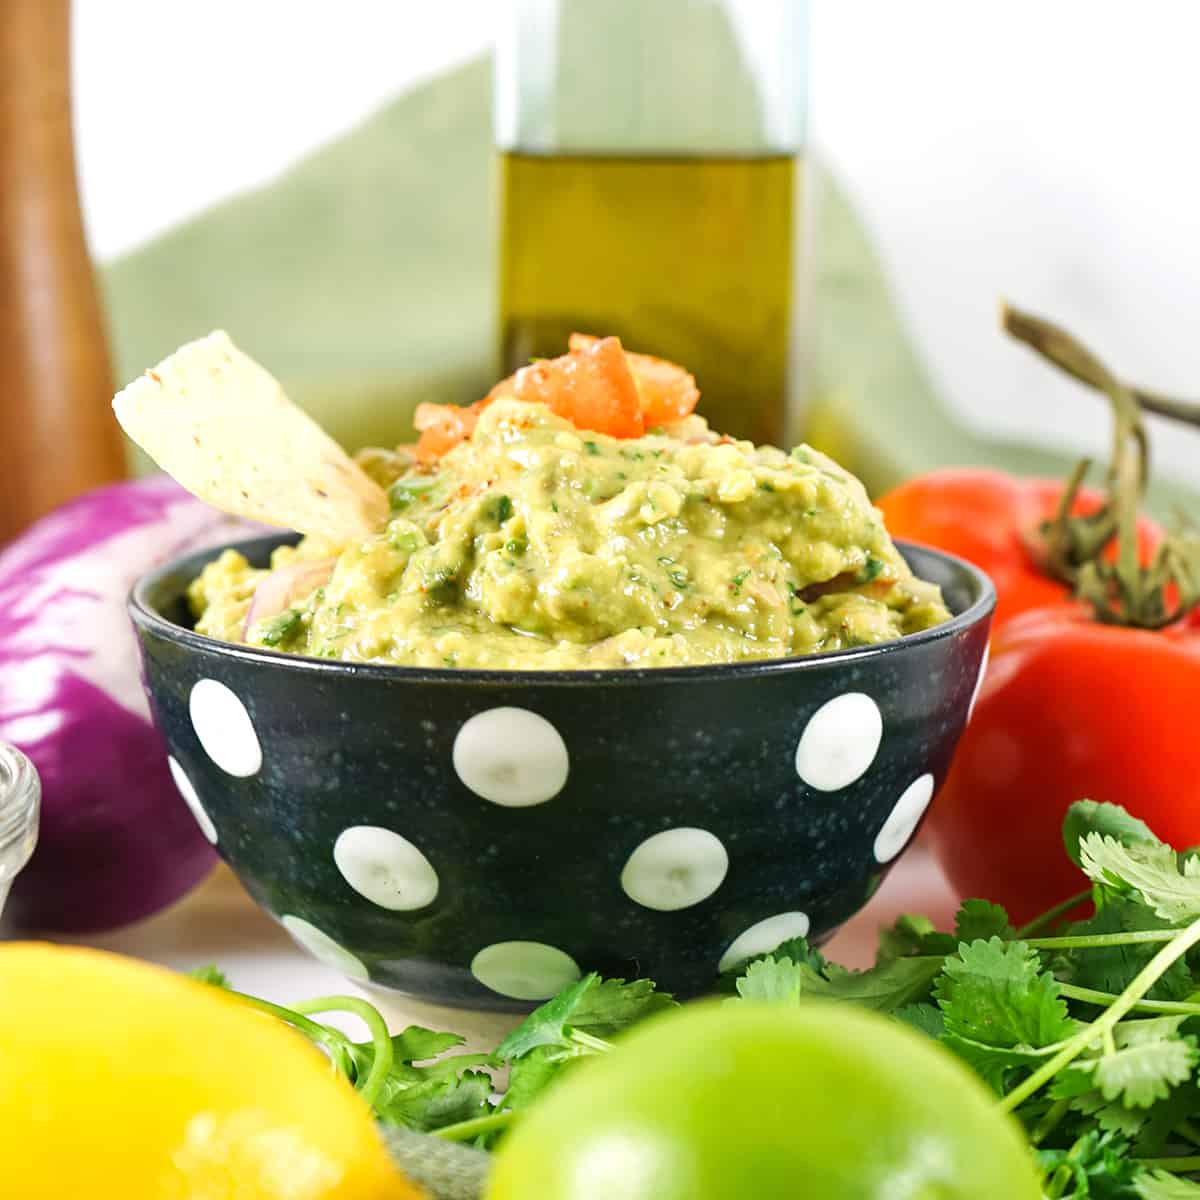 Finished guacamole in a decorative bowl surrounded by ingredients used in the recipe.